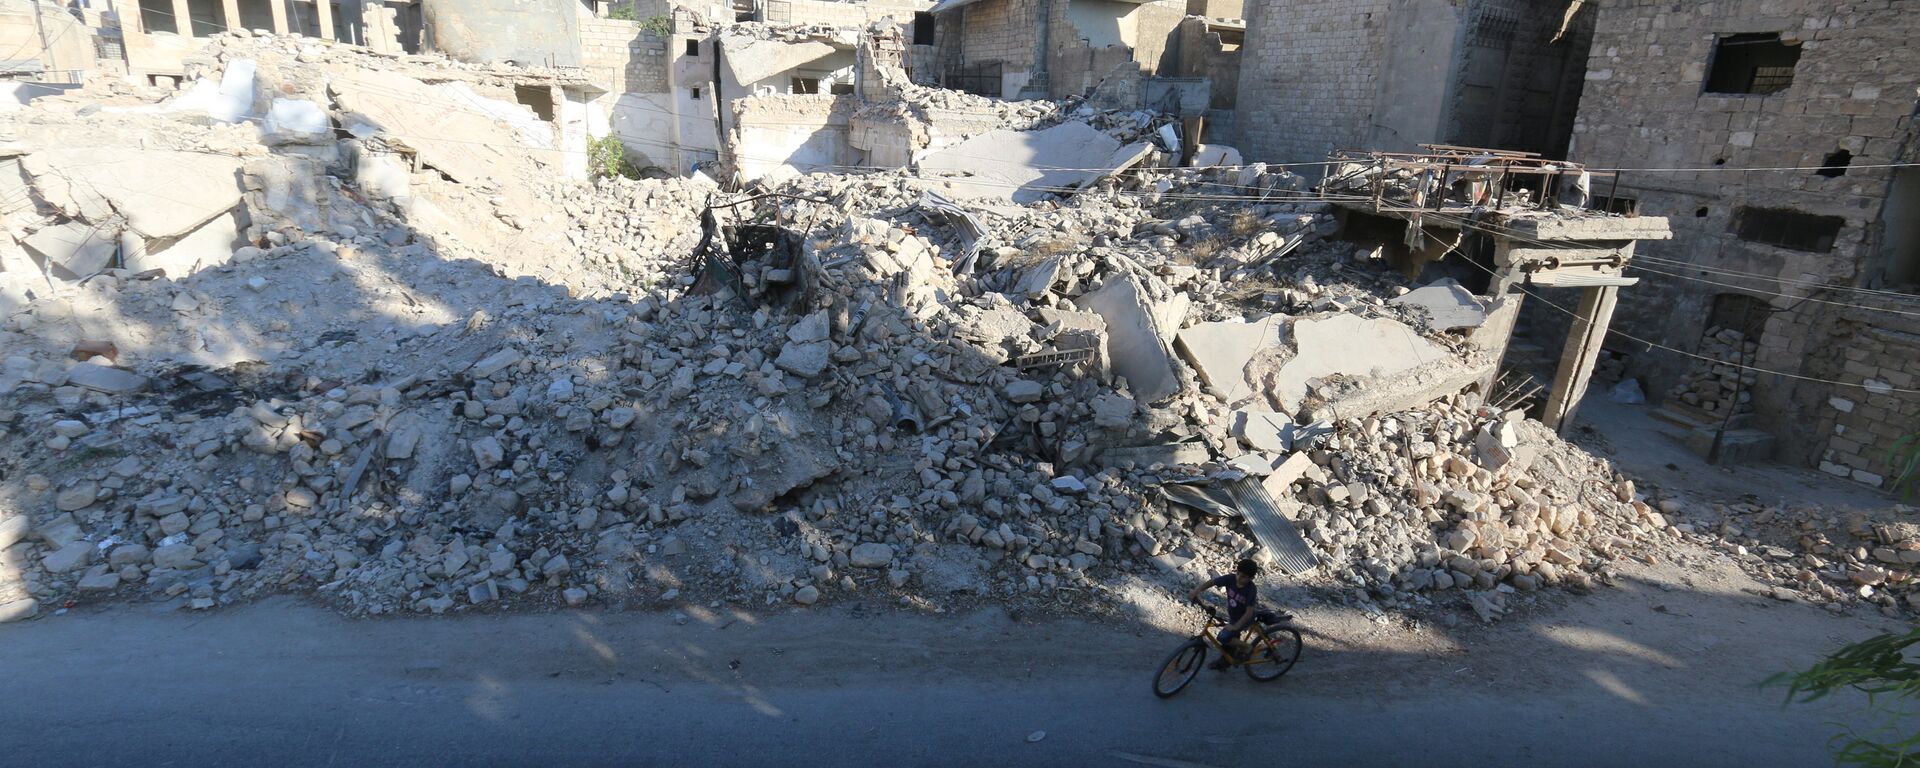 A boy rides a bicycle near rubble of damaged buildings in the rebel held al-Maadi district of Aleppo, Syria, August 31, 2016 - Sputnik Mundo, 1920, 01.06.2021